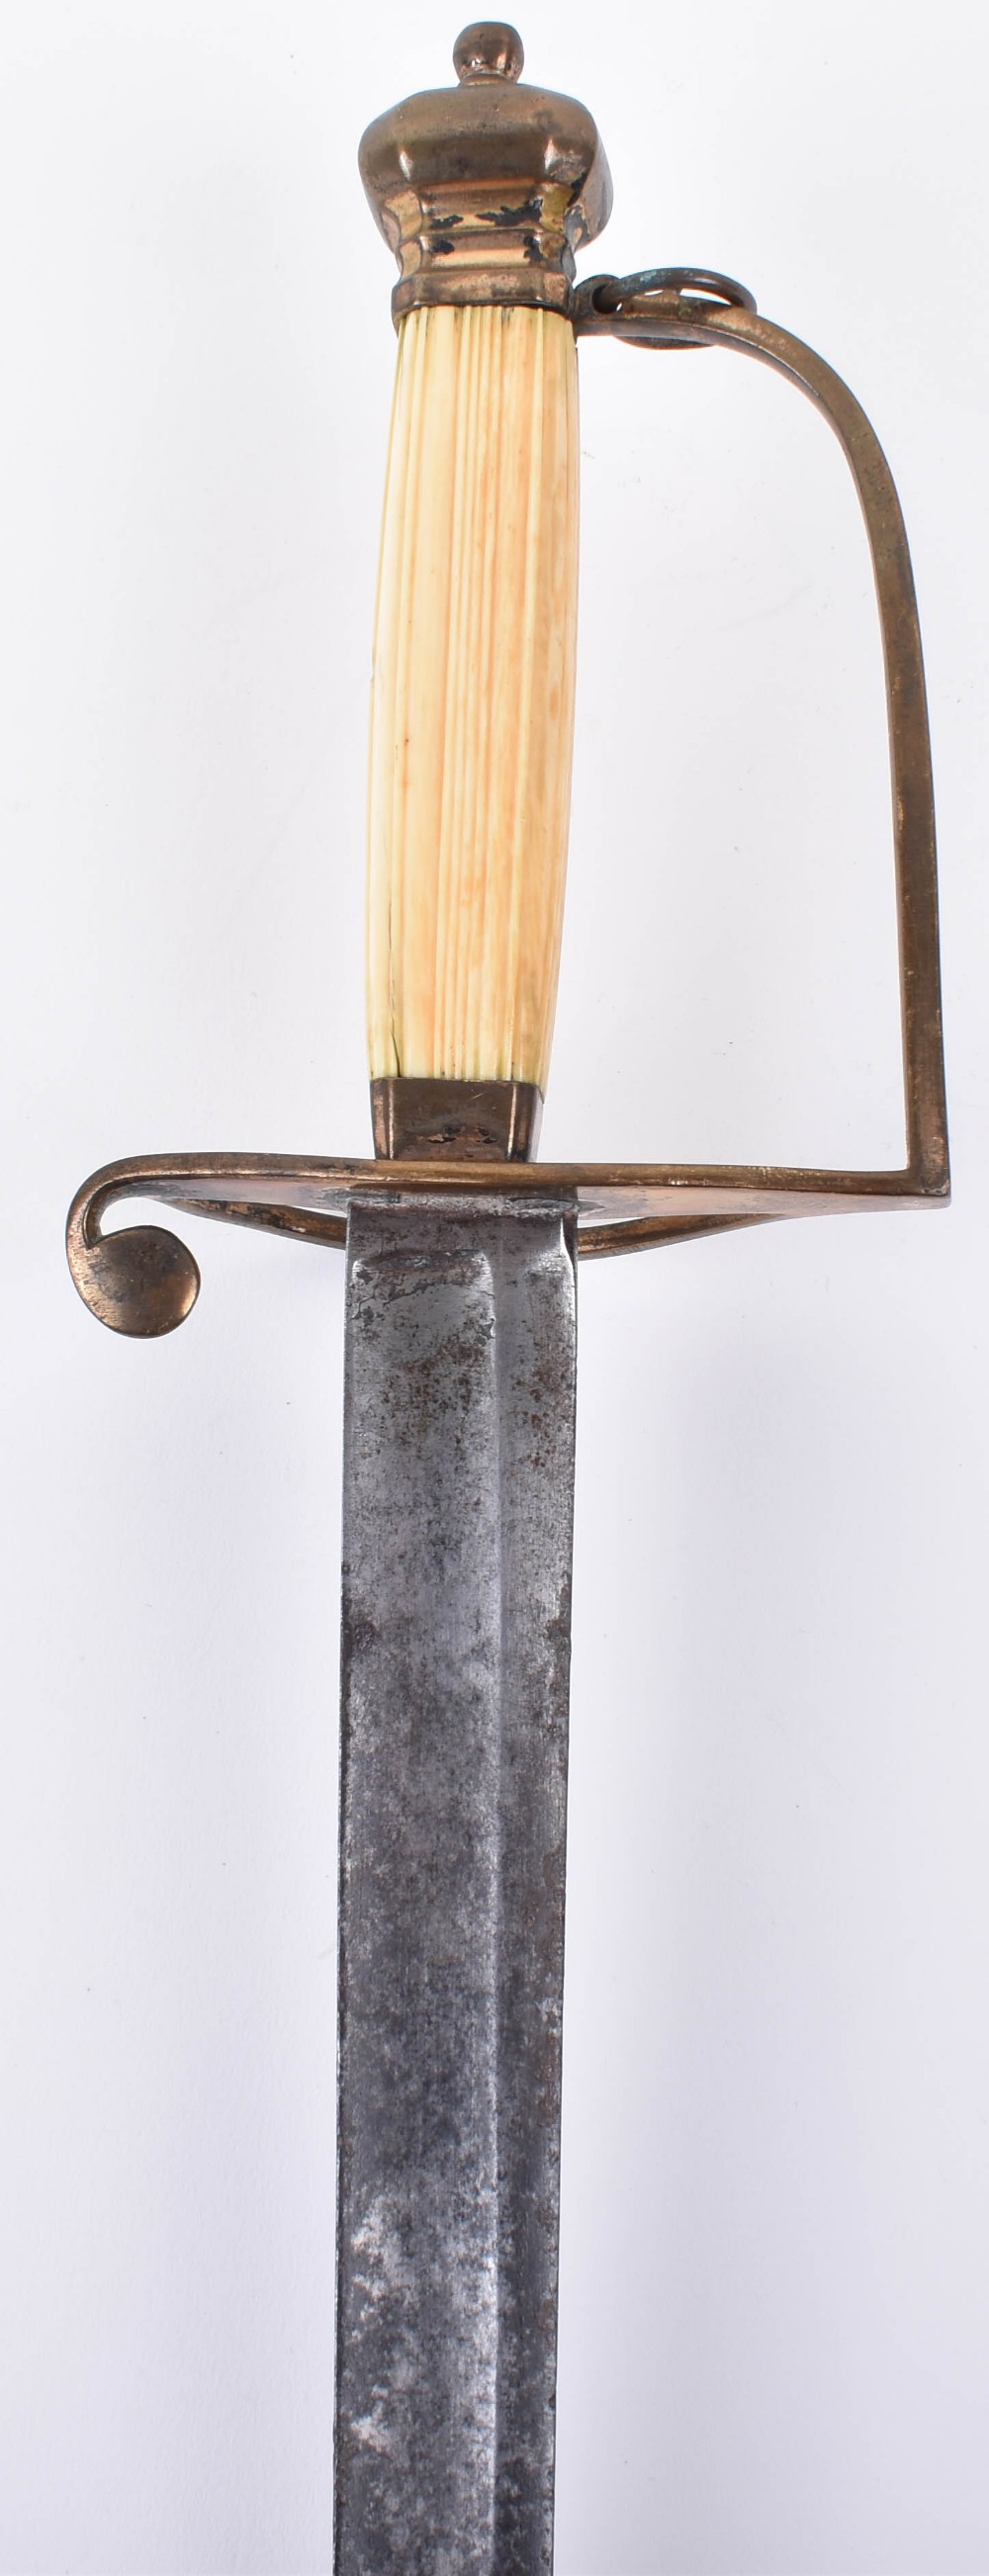 ^ Infantry officer’s sword spadroon c.1800 - Image 11 of 11